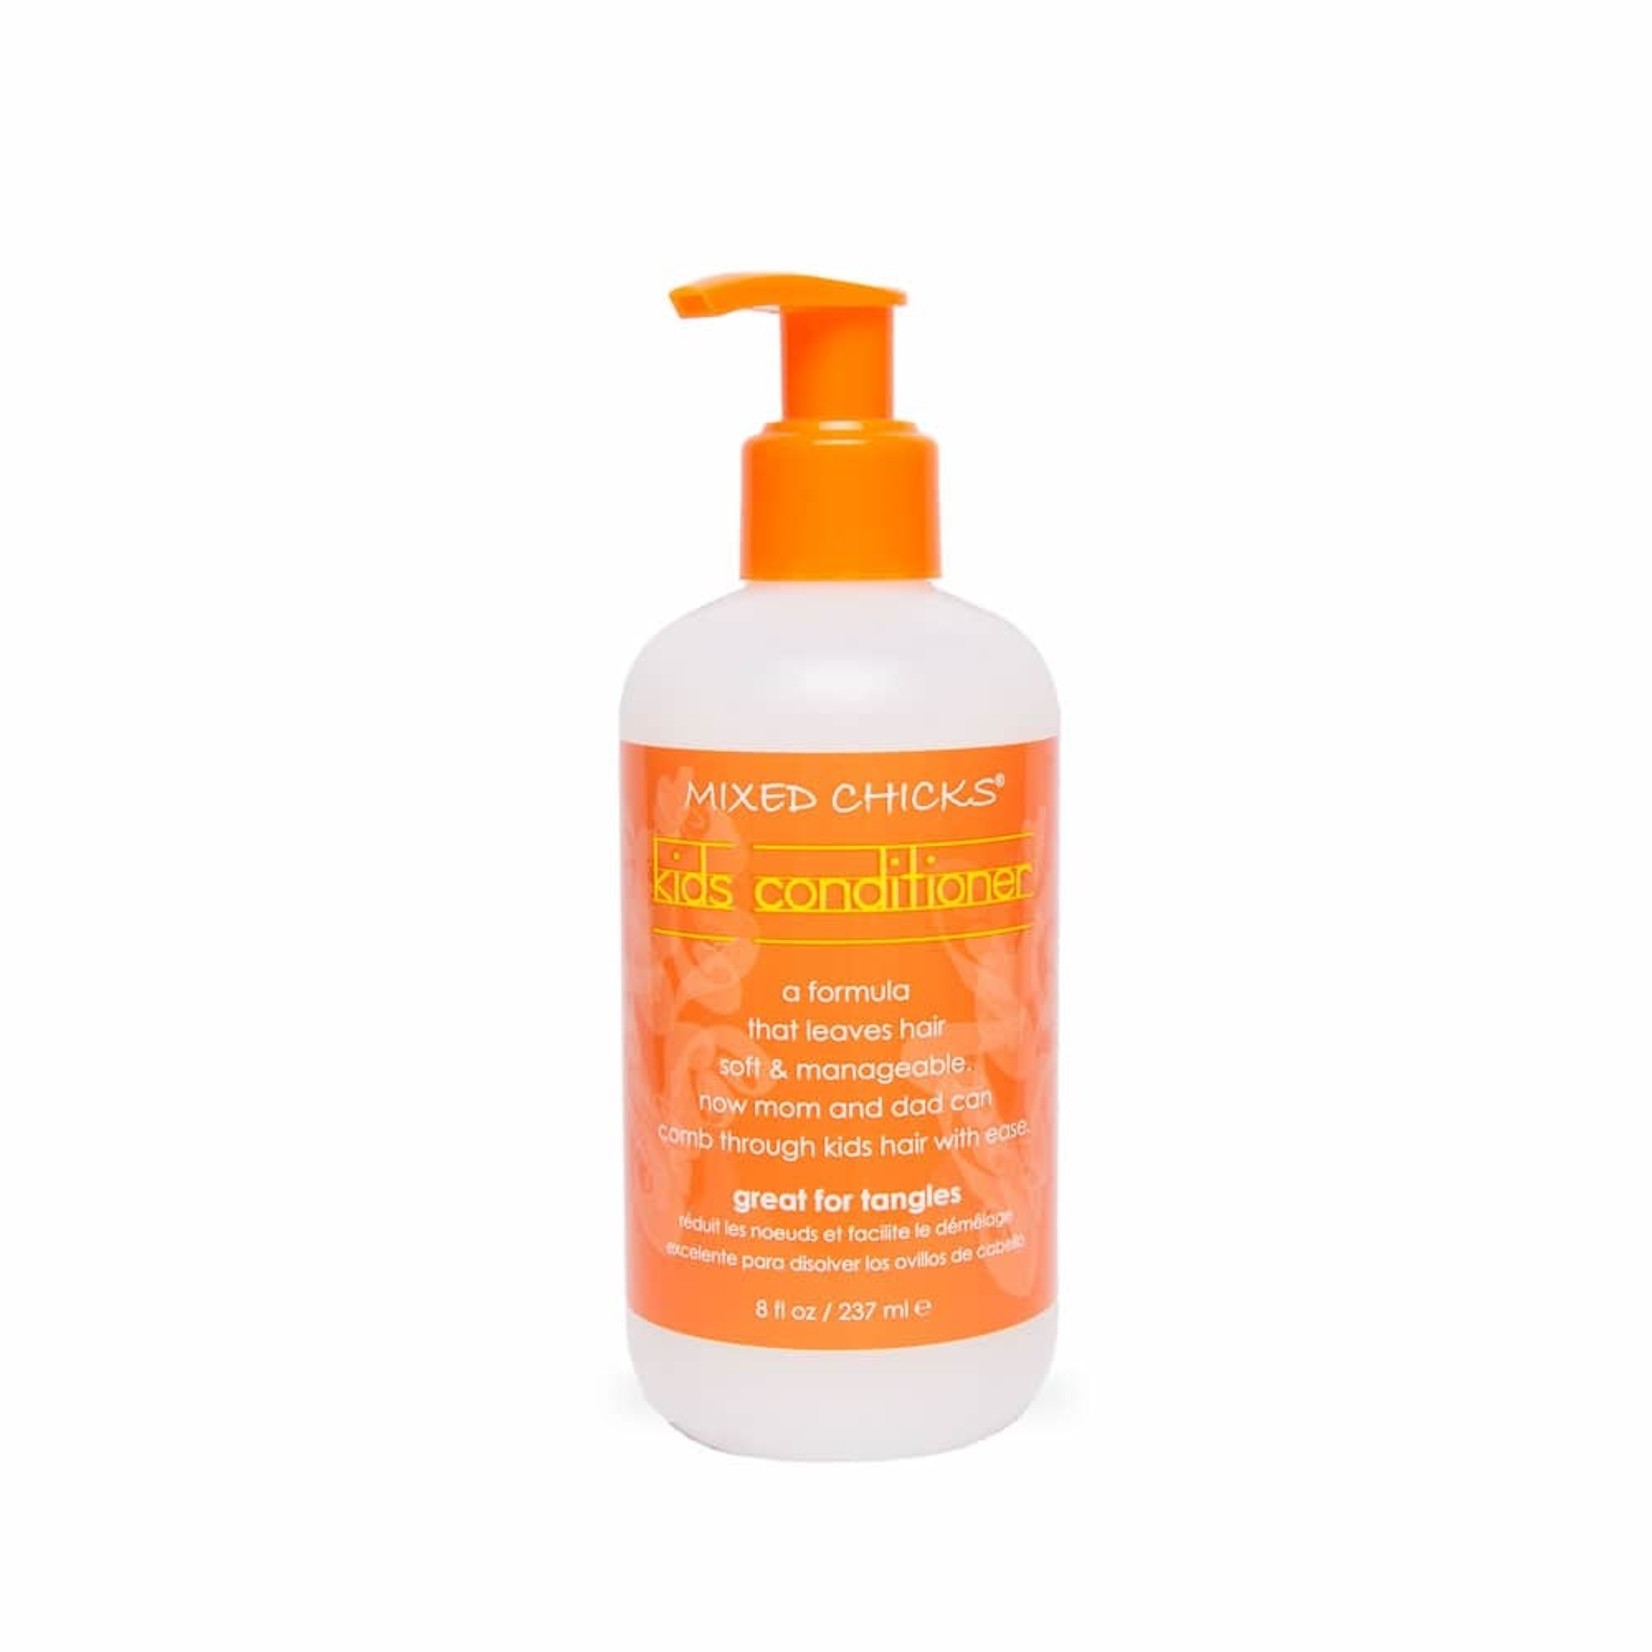 Mixed Chicks Mixed Chicks Kids Conditioner 8 oz